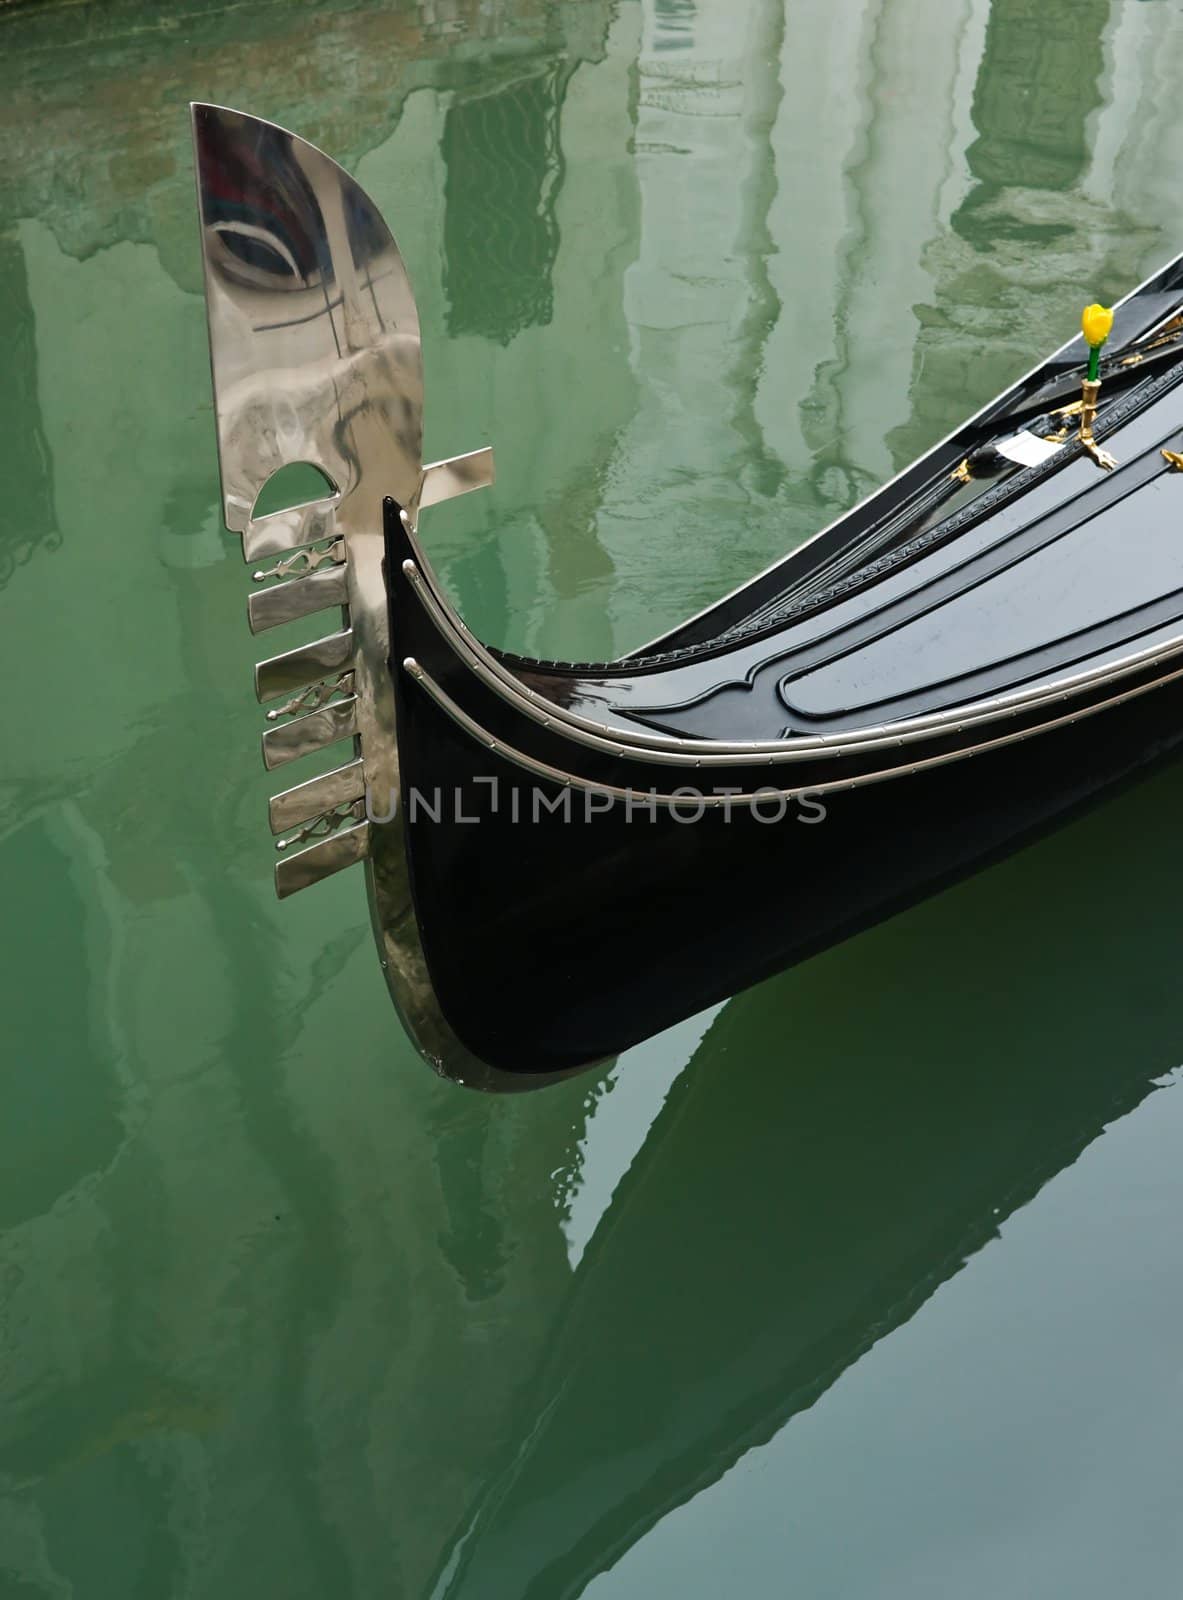 Detail of a Venetian gondola and reflection in a channel